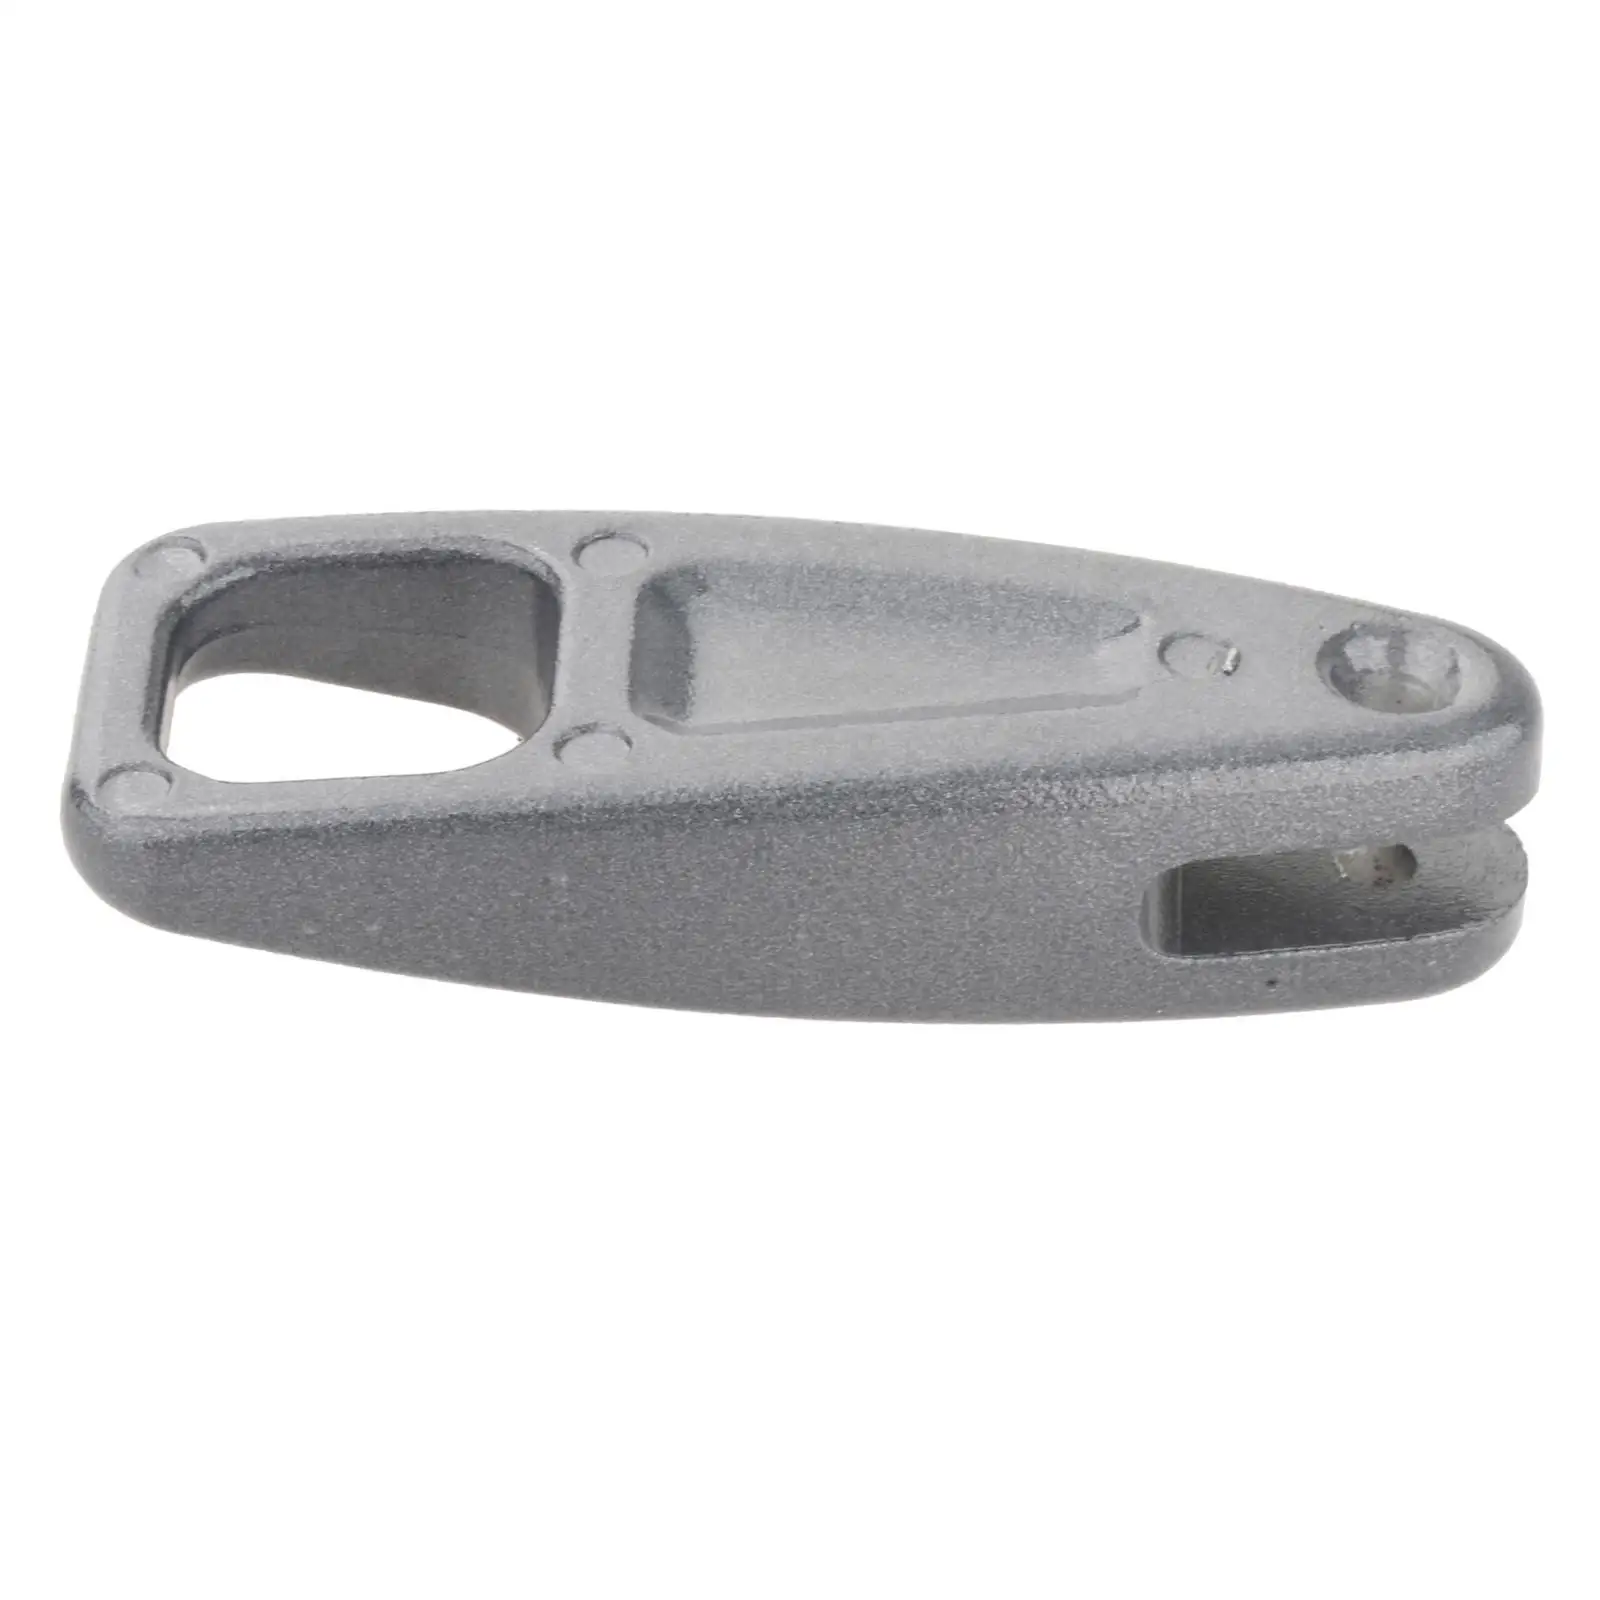 Handle Transom Clamp for HDX 663-43118-01-4D